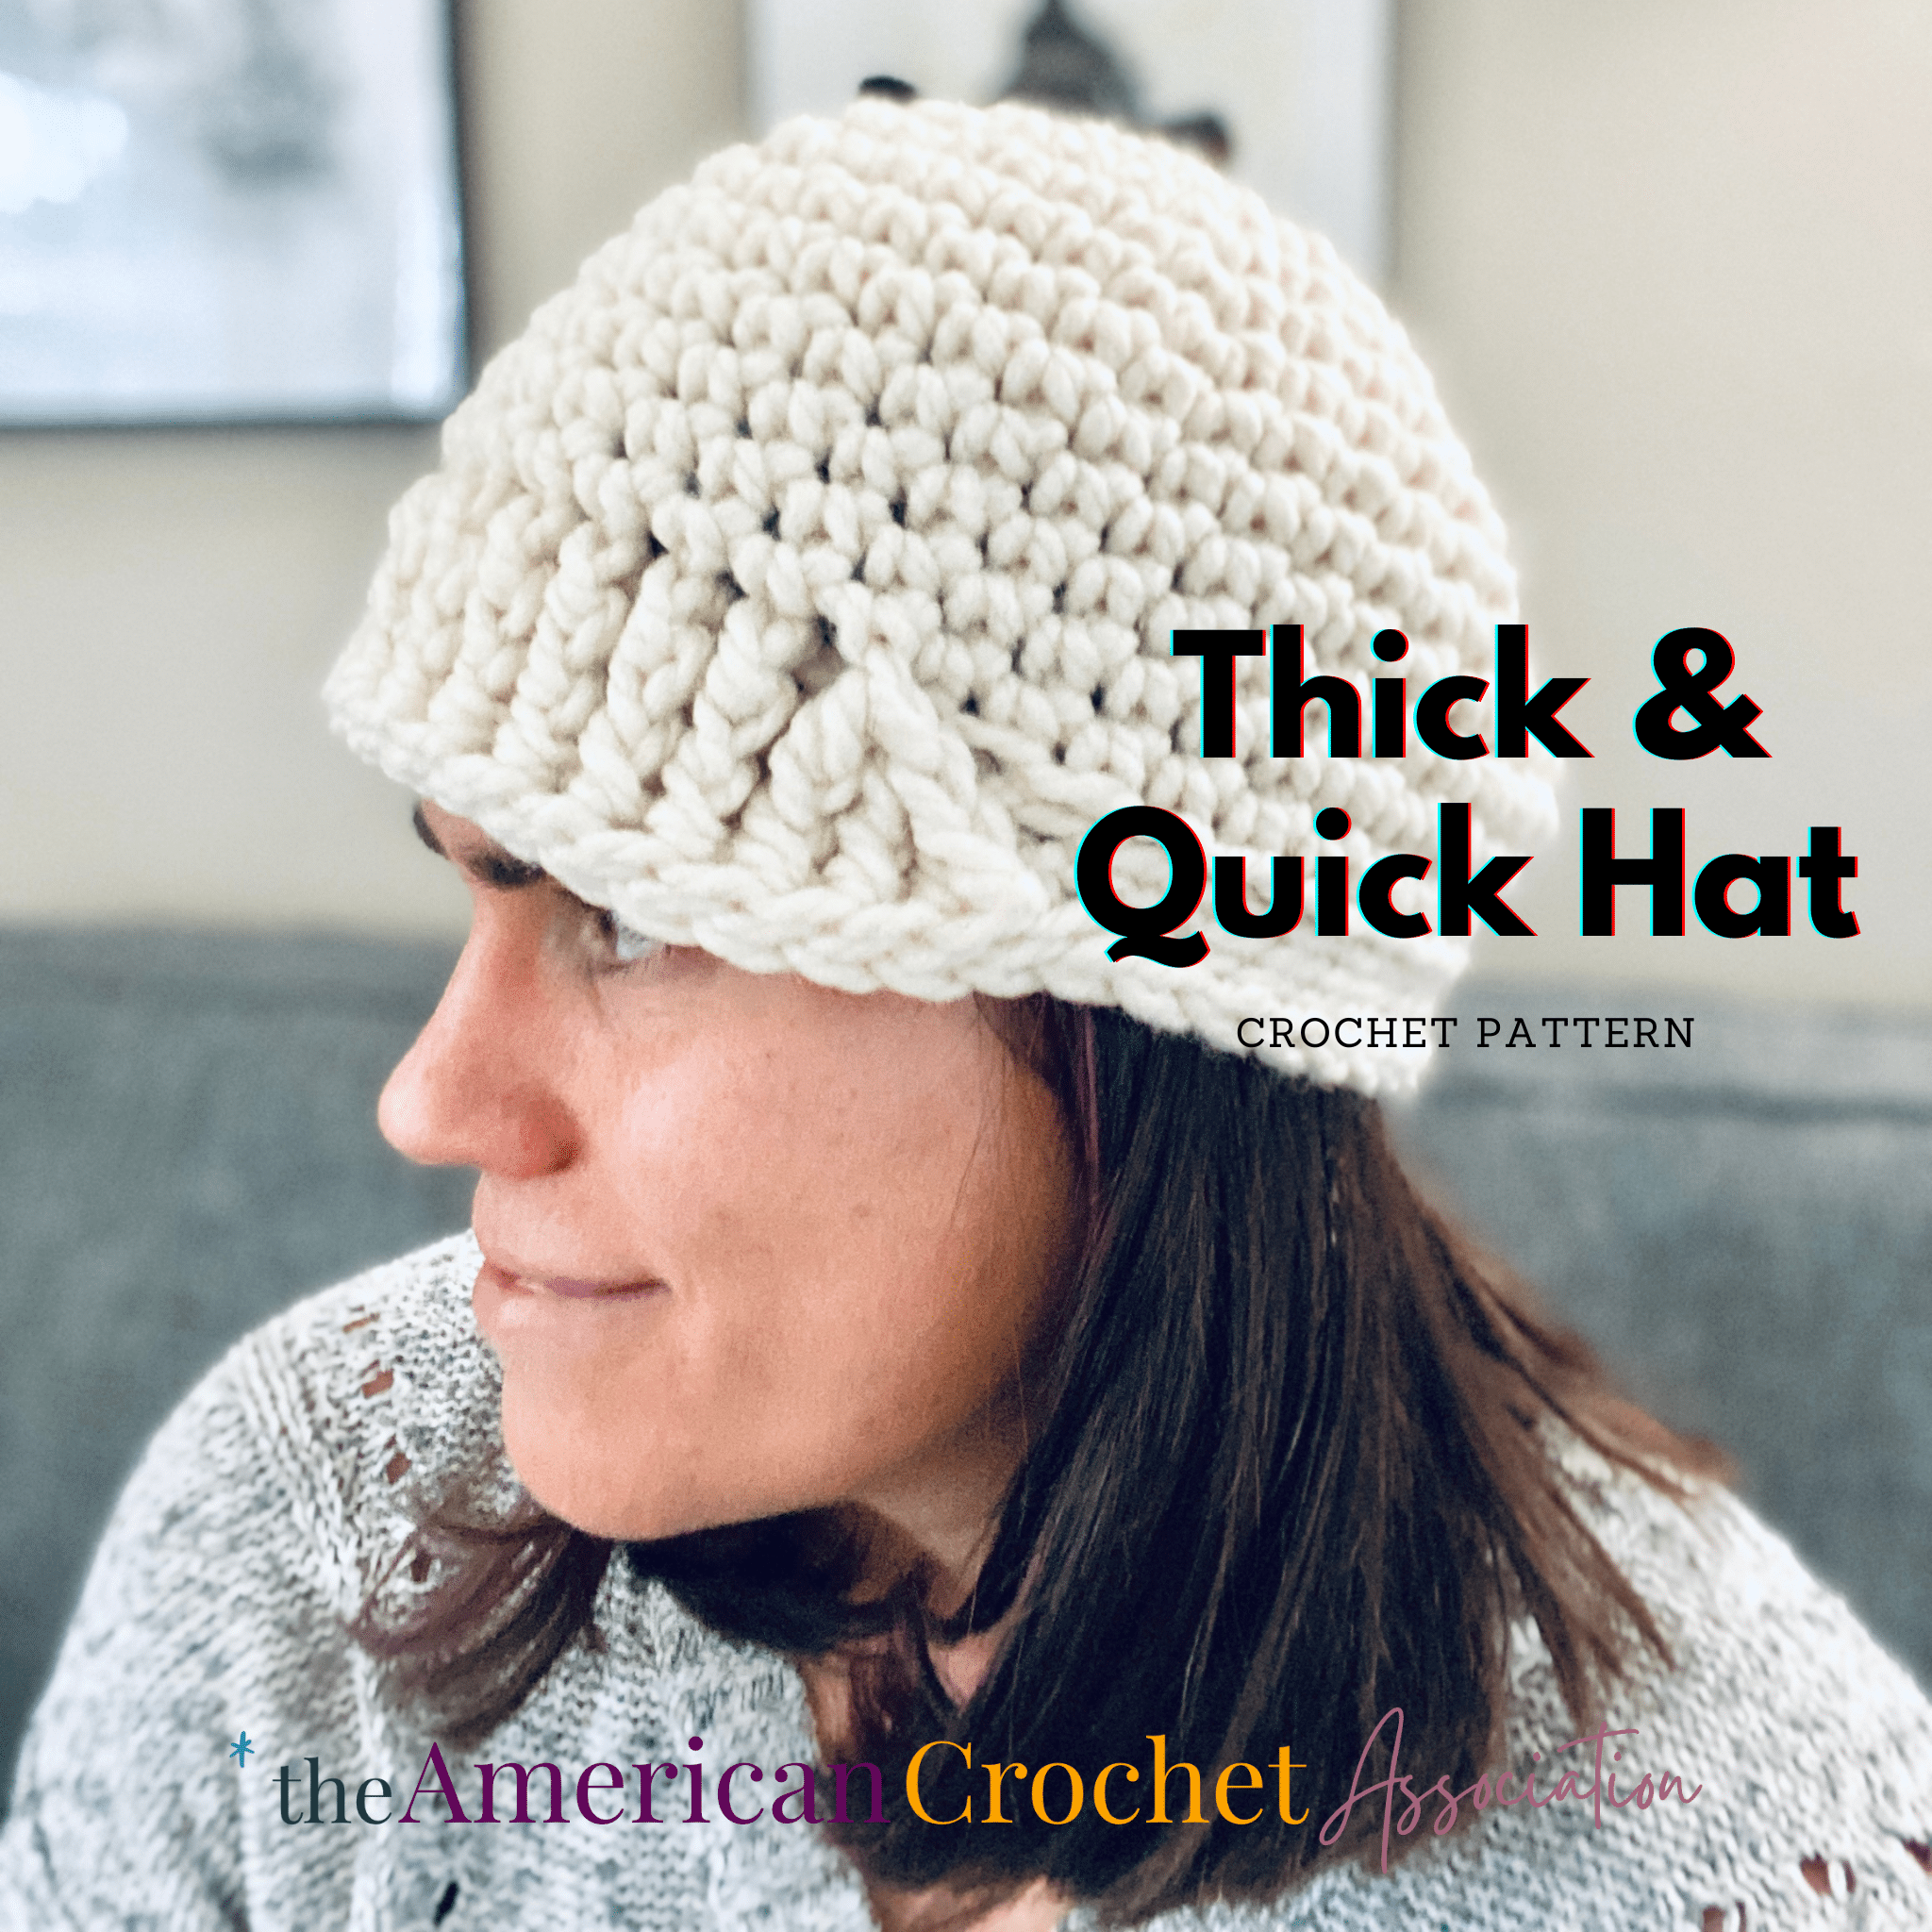 Thick and Quick Crochet Hat with Brim